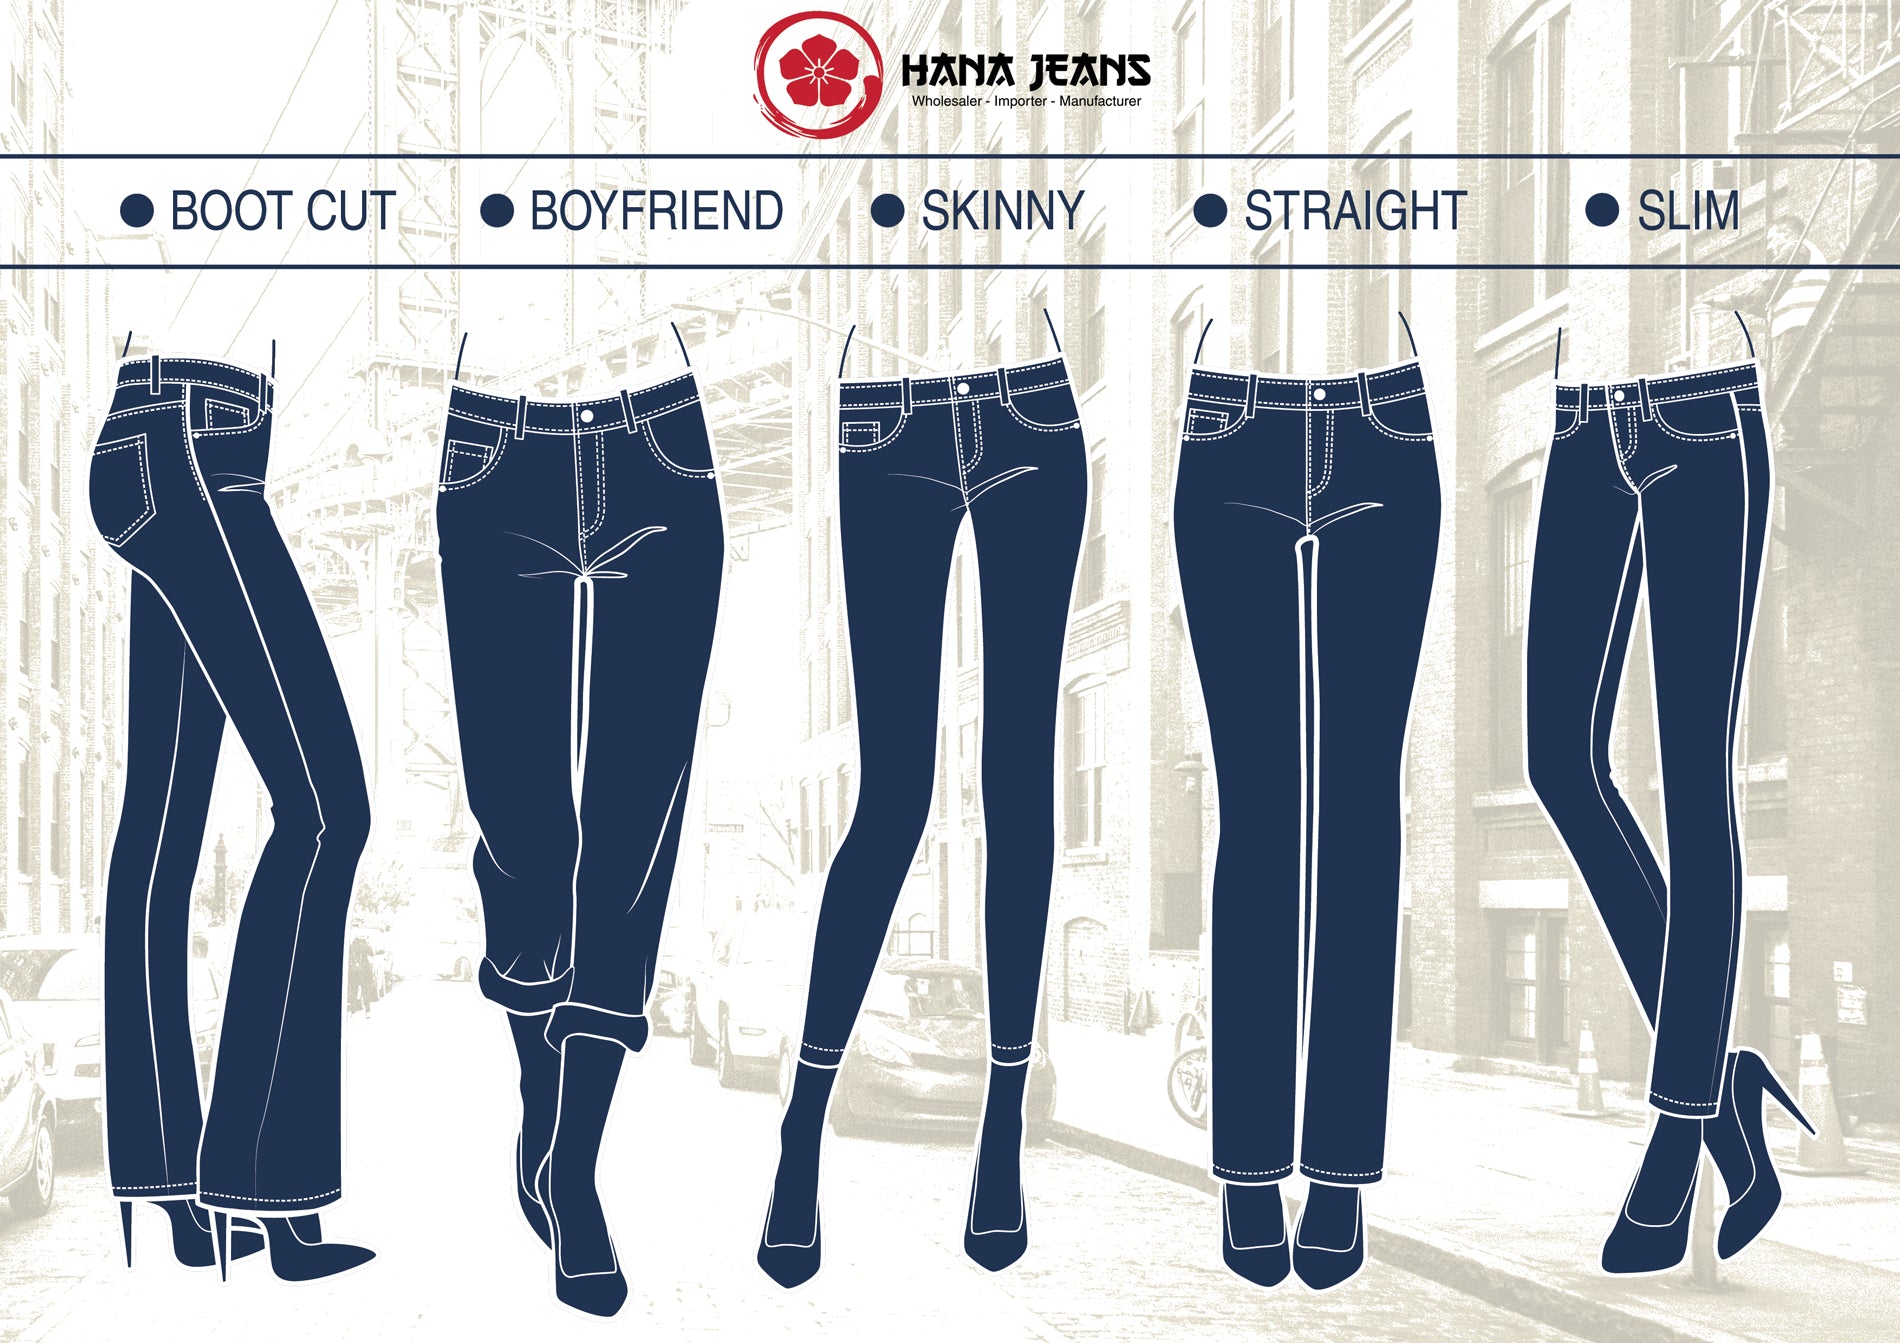 Difference in “cuts” and styles of Denim Jeans pic image